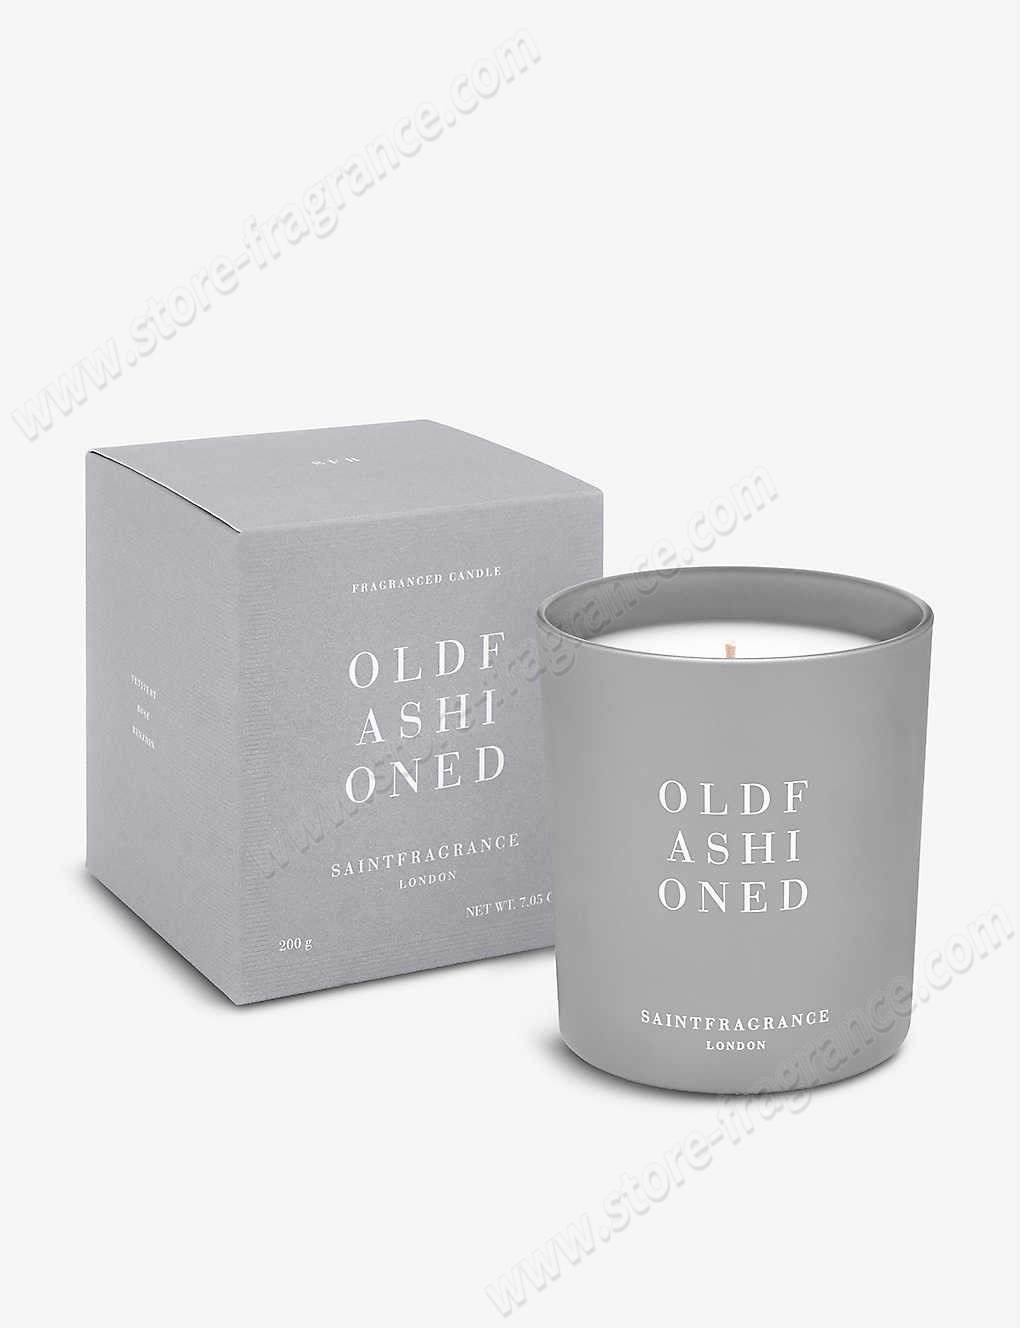 SAINT FRAGRANCE LONDON/Old Fashioned scented candle 200g ✿ Discount Store - -1